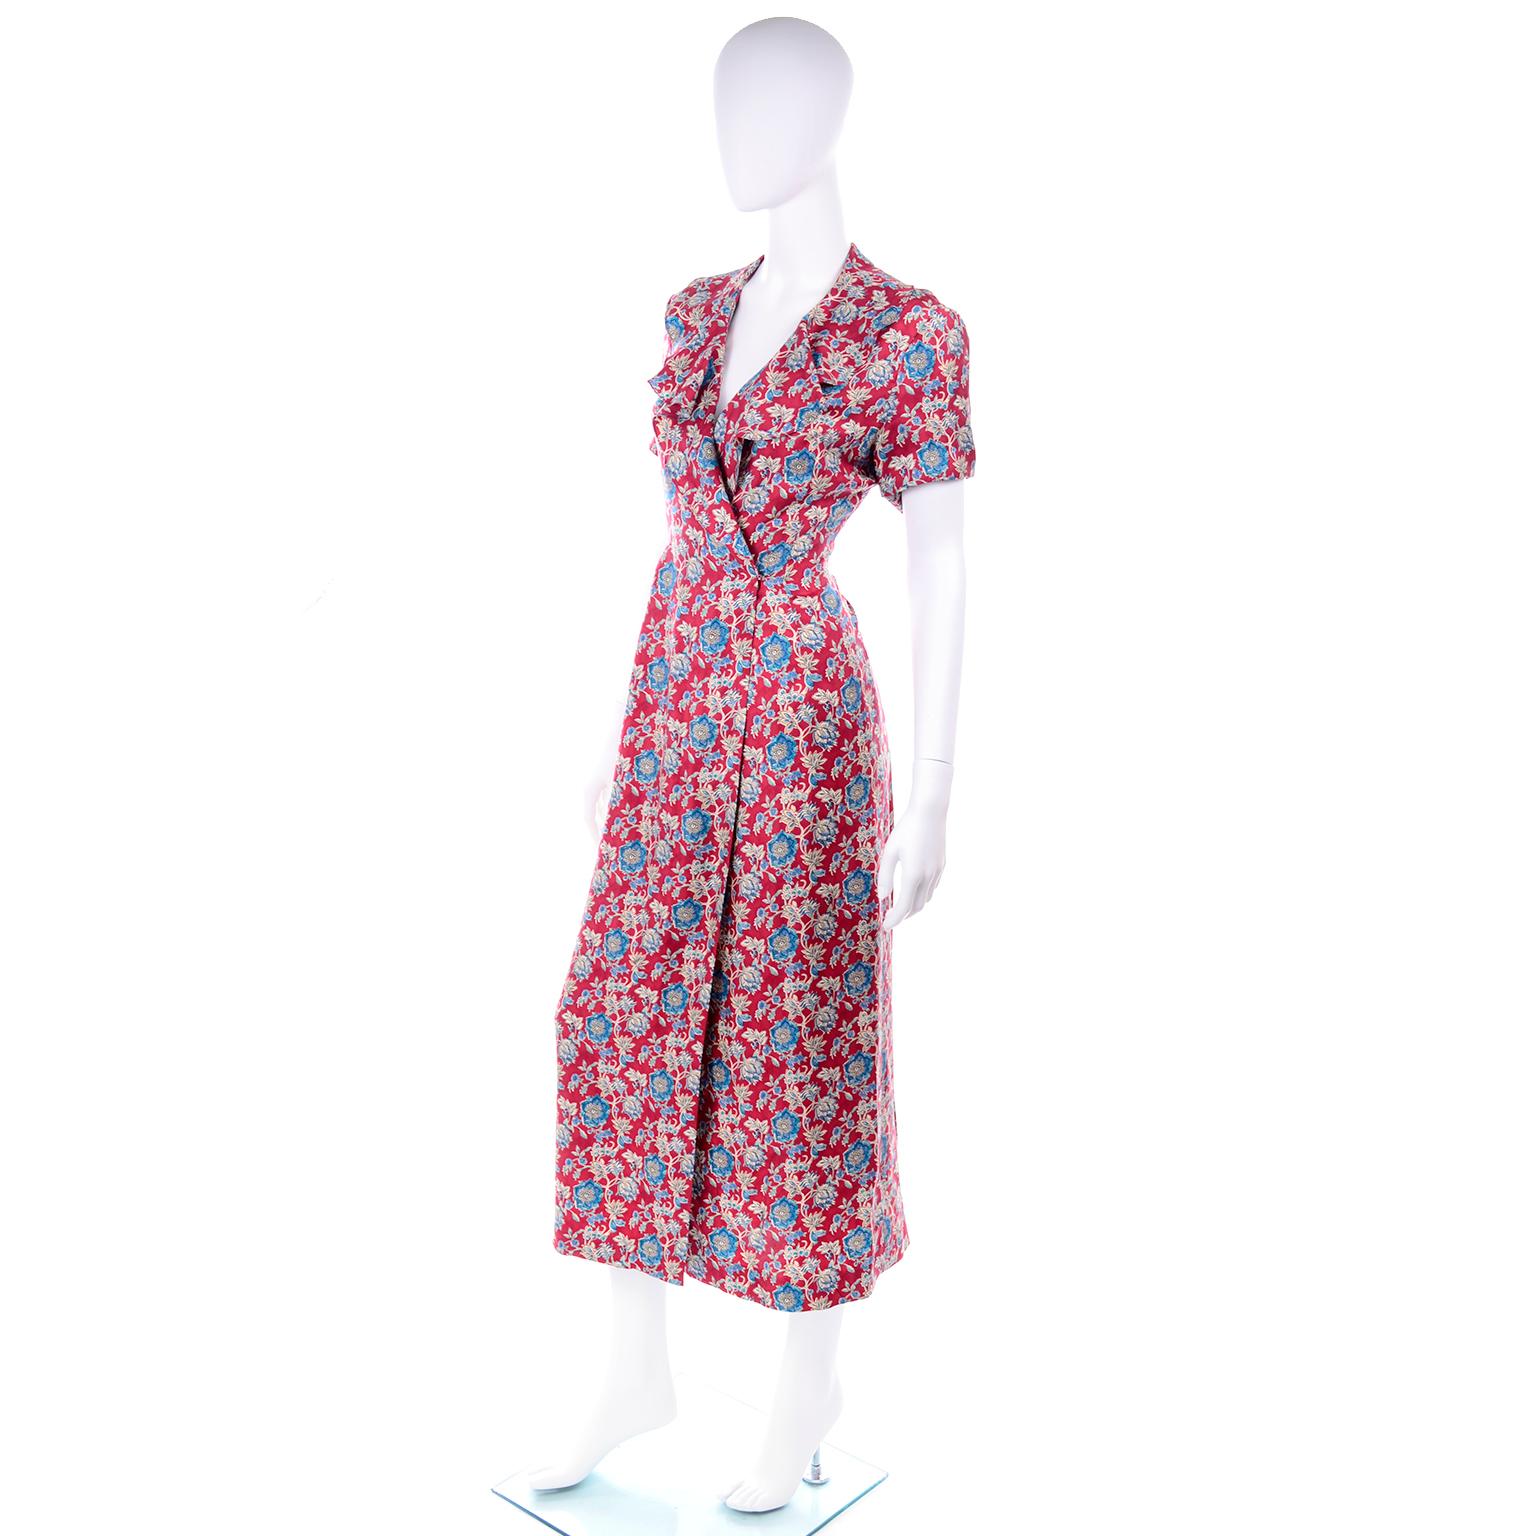 This is a lovely vintage Ralph Lauren silk wrap dress with a ruffled neckline in a red and blue floral print. This pretty short sleeve day dress falls mid calf or longer depending on your height and is marked a size 4. Please review all of the